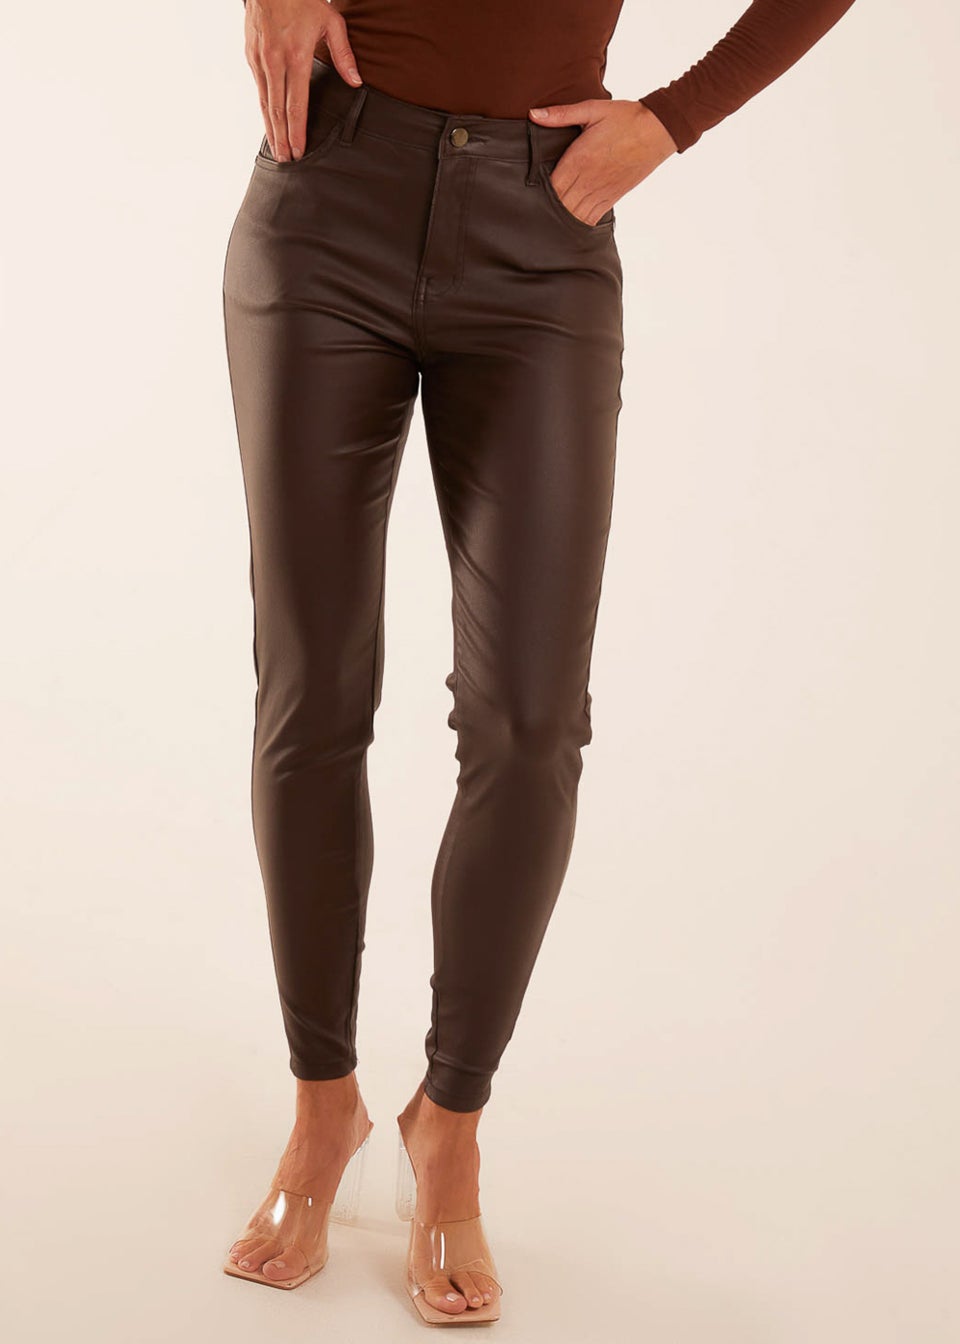 Blue Vanilla Brown PU Mid Rise Coated Skinny Jeans